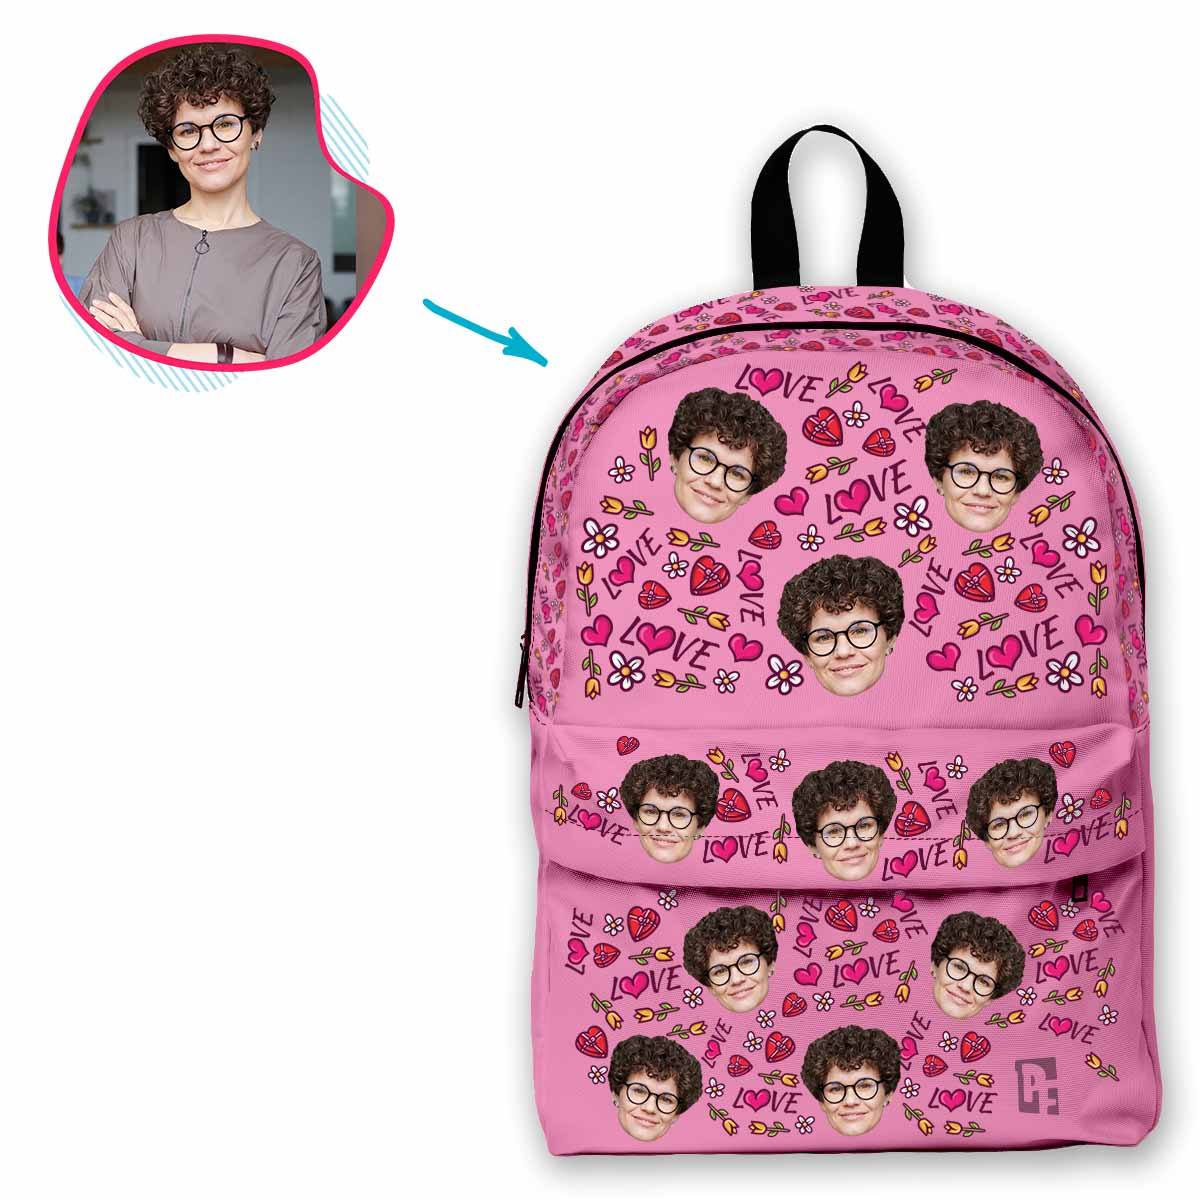 pink Hearts and Flowers classic backpack personalized with photo of face printed on it